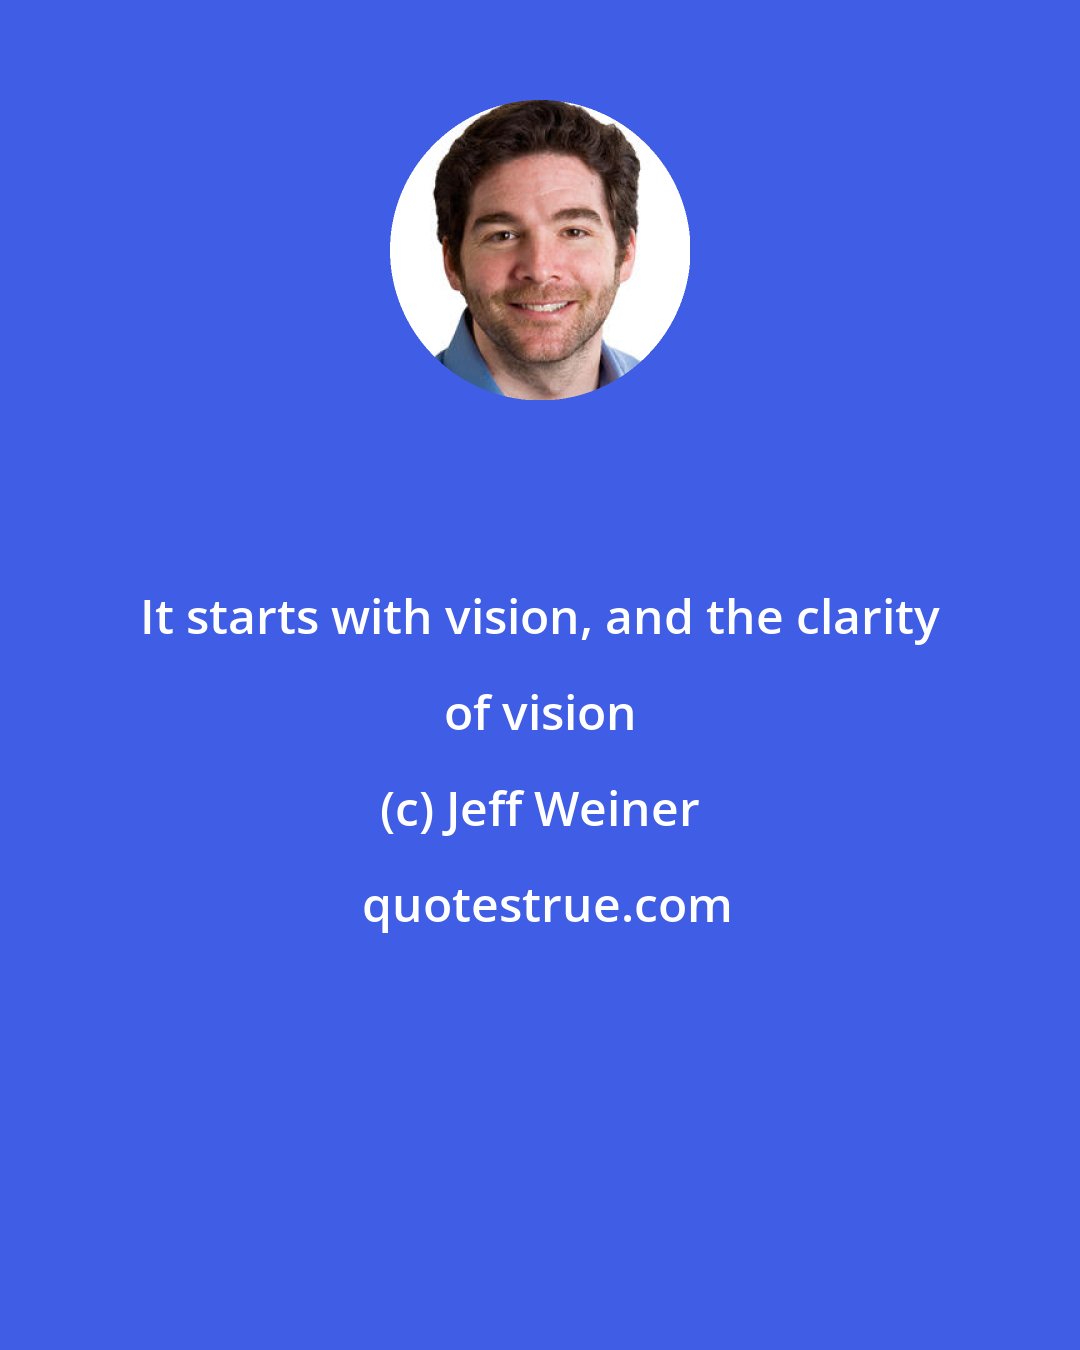 Jeff Weiner: It starts with vision, and the clarity of vision